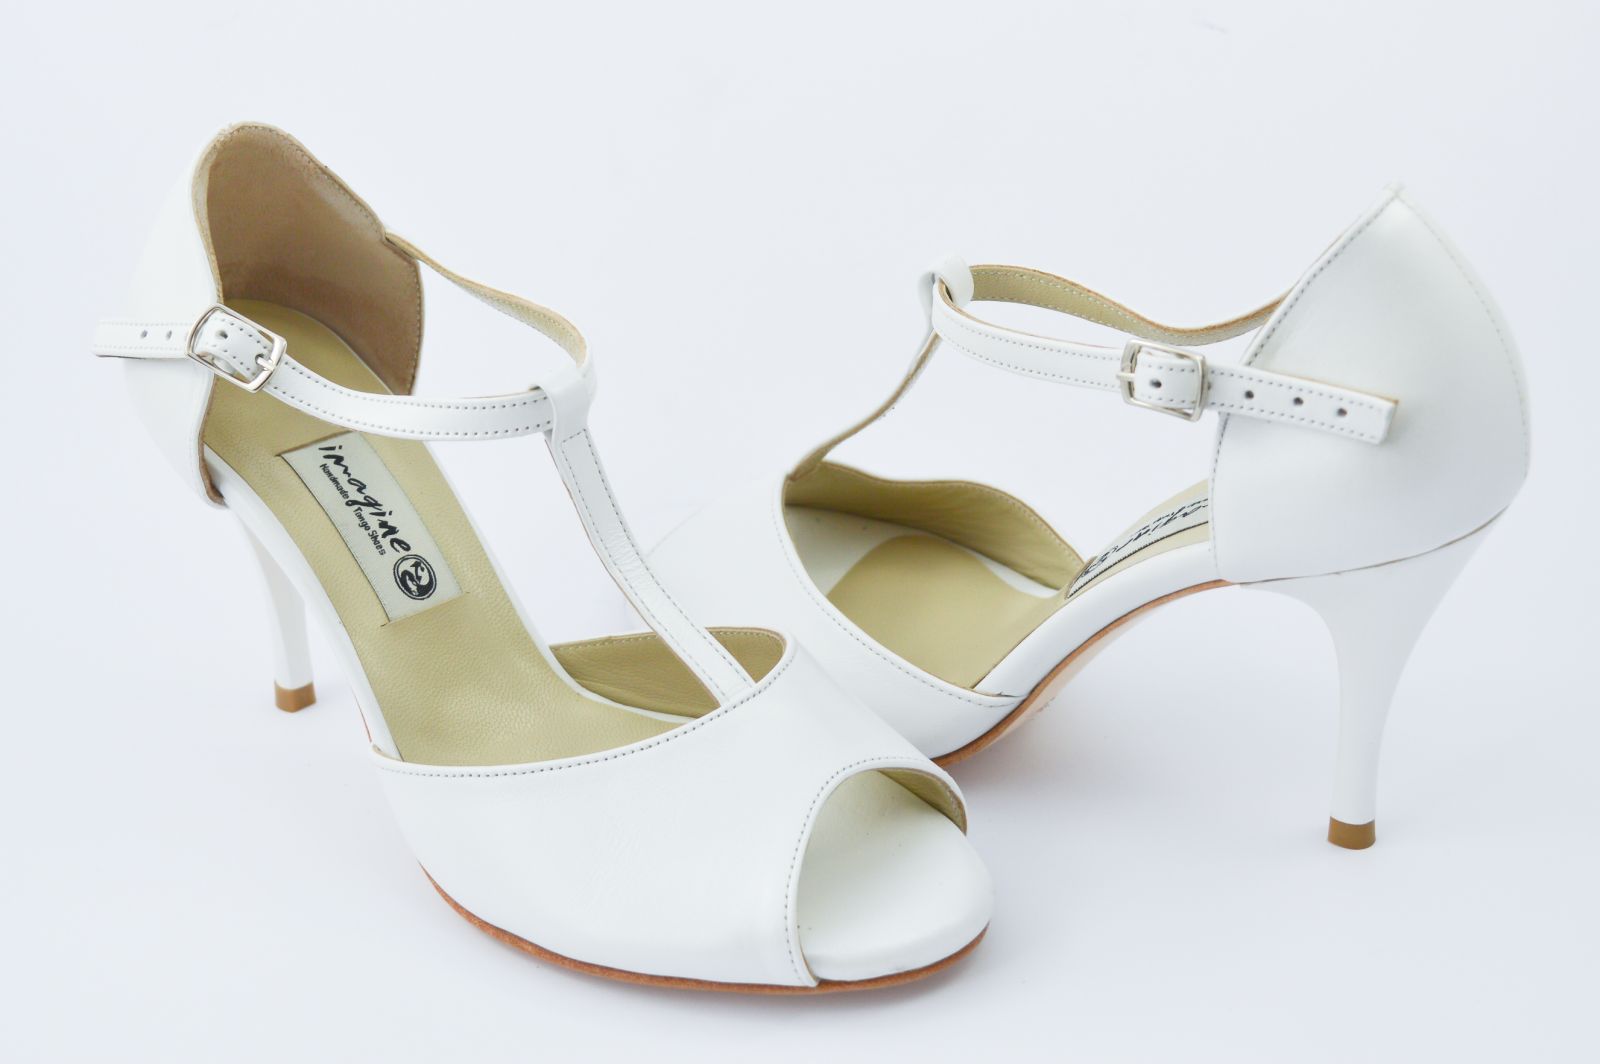 Gorgeous bridal shoes with 